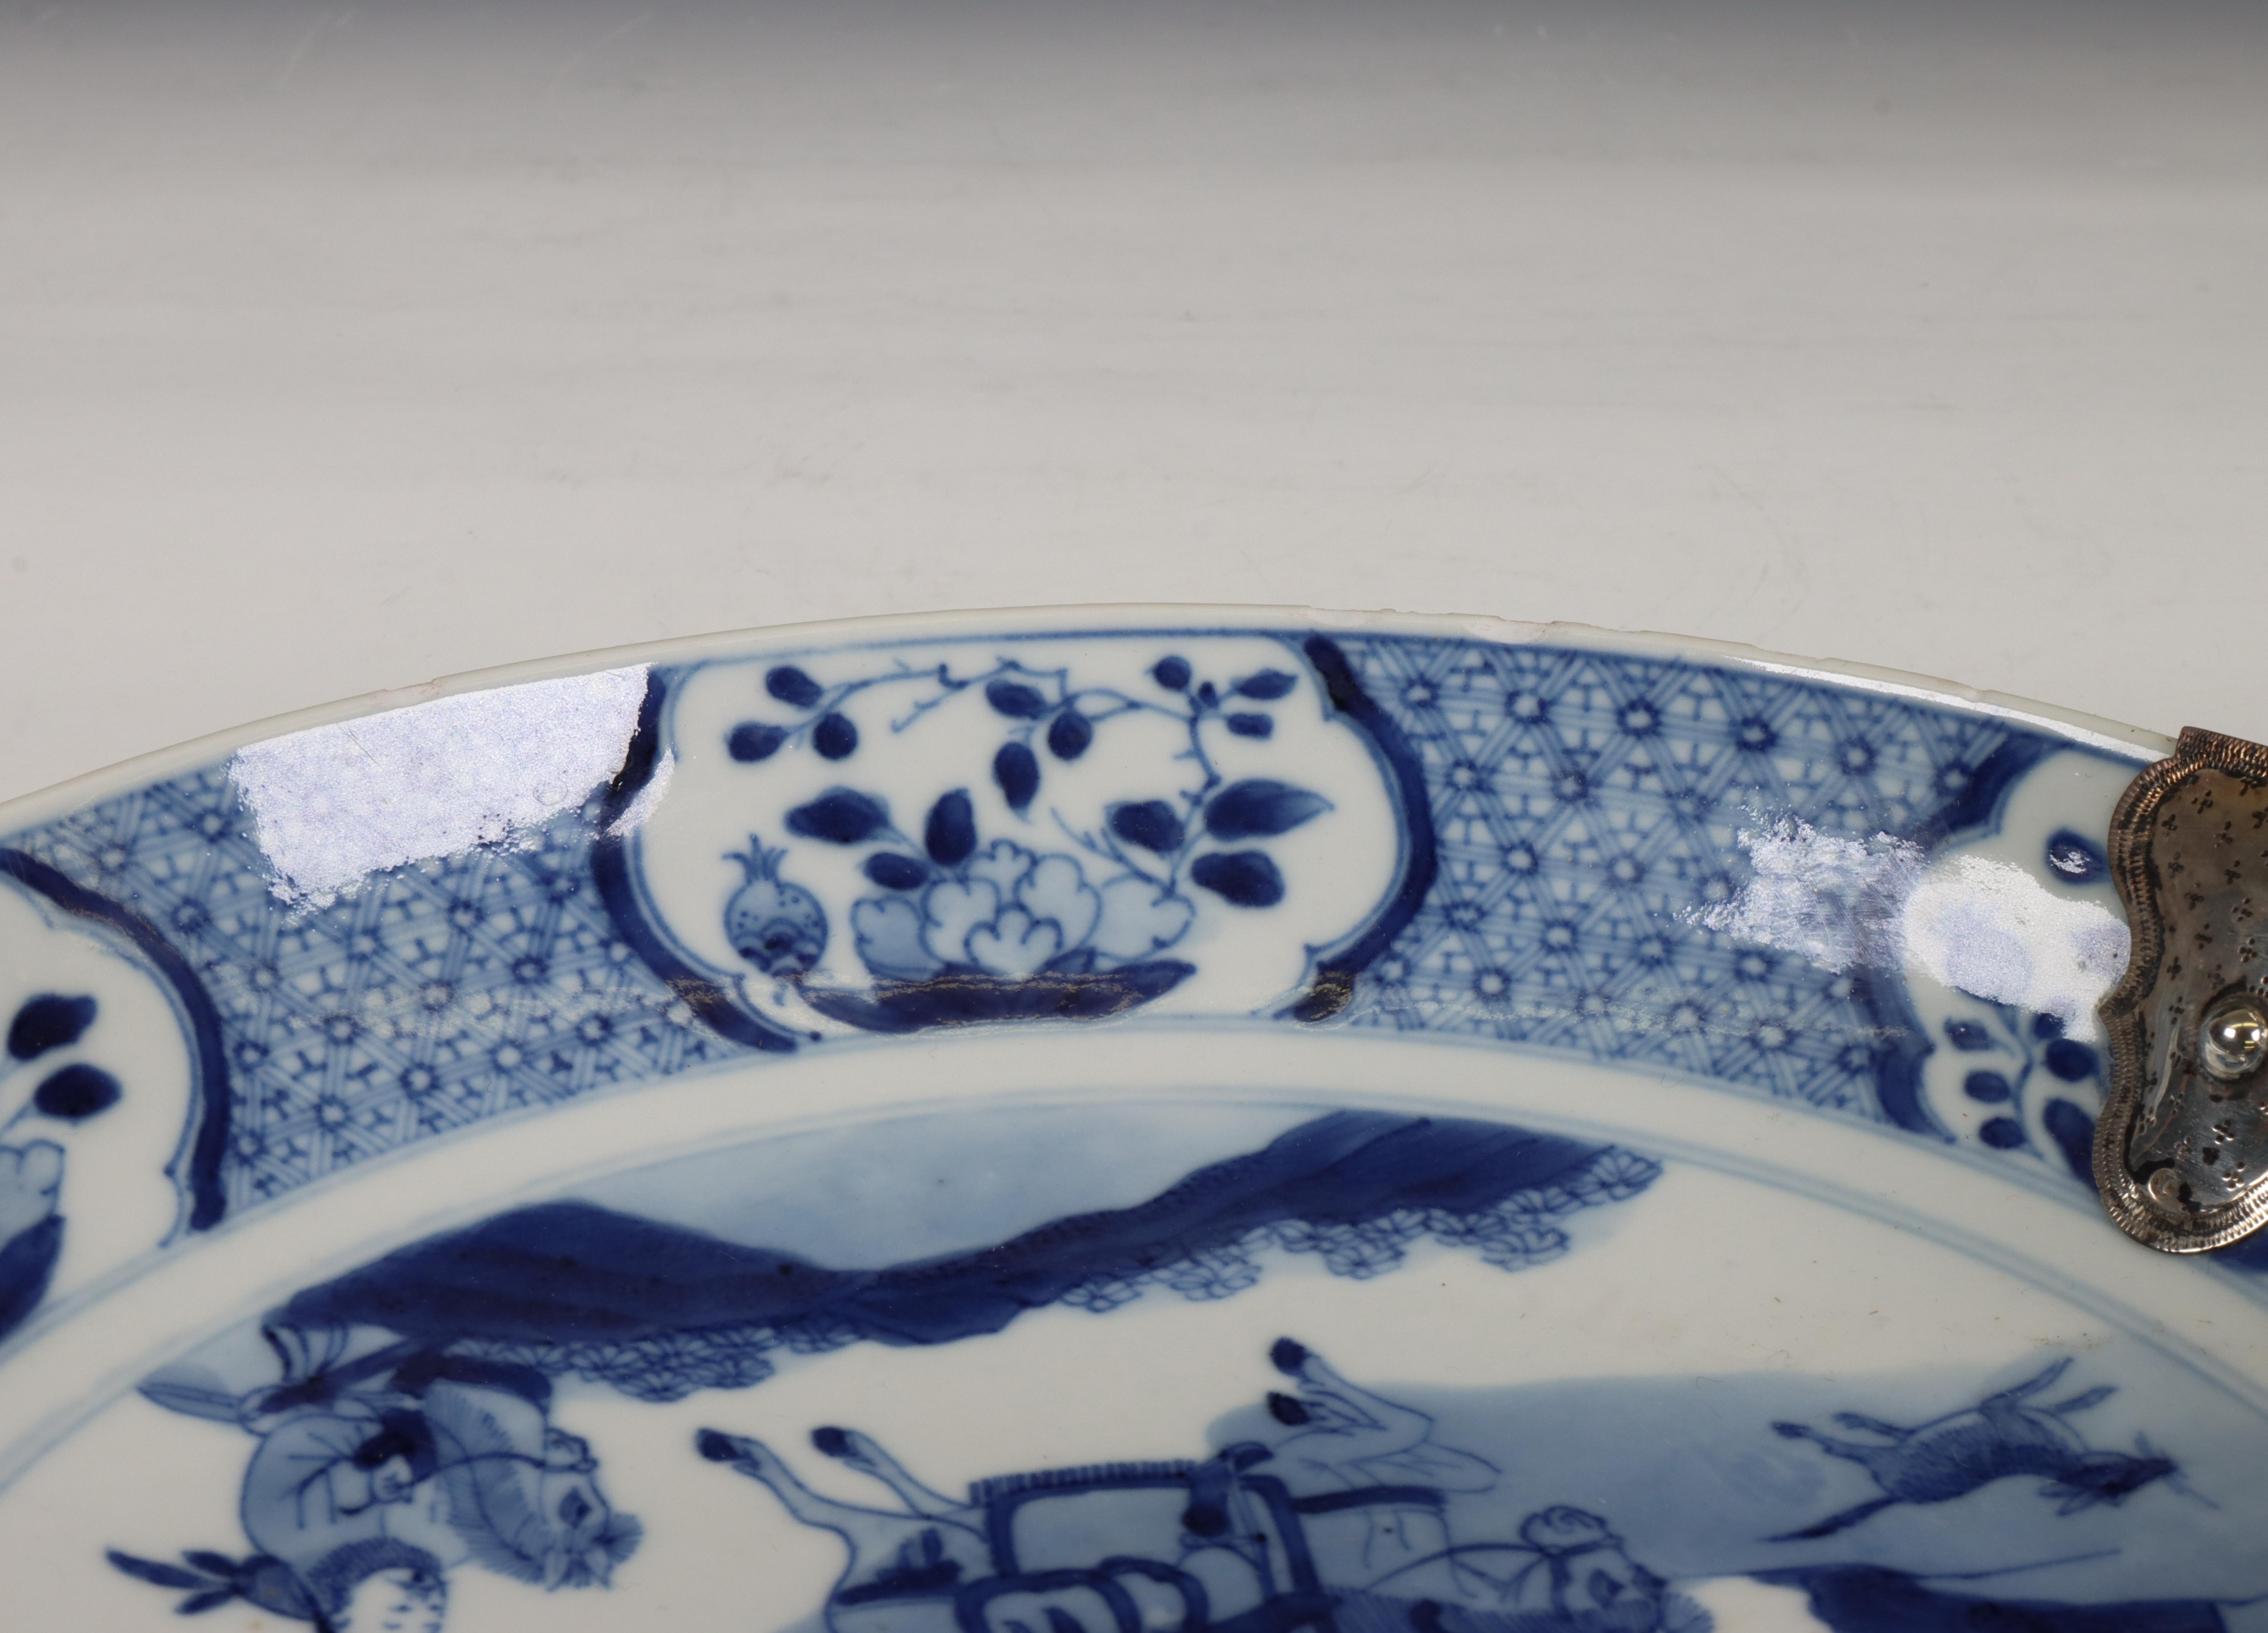 China, silver-mounted blue and white porcelain 'Joosje te paard' dish, 18th-19th century, - Image 3 of 4